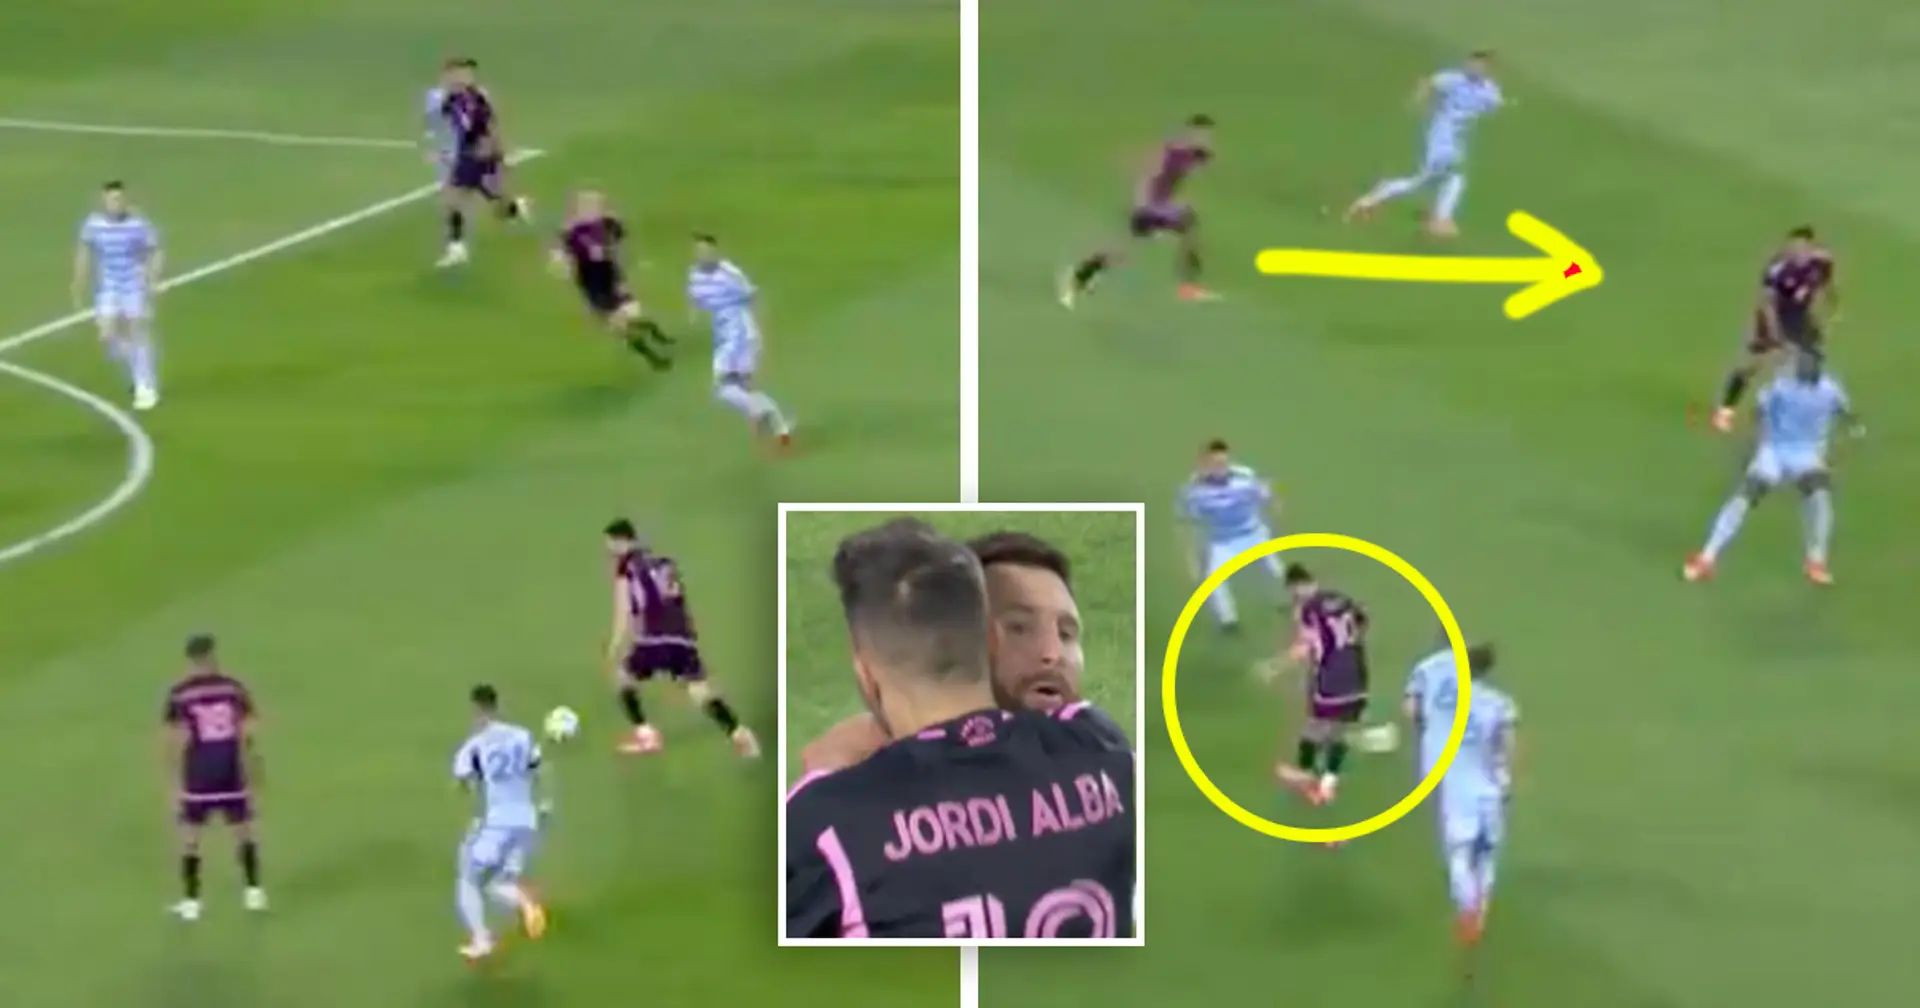 Messi unleashes thunderbolt strike for Miami, delivers one-of-a-kind assist too